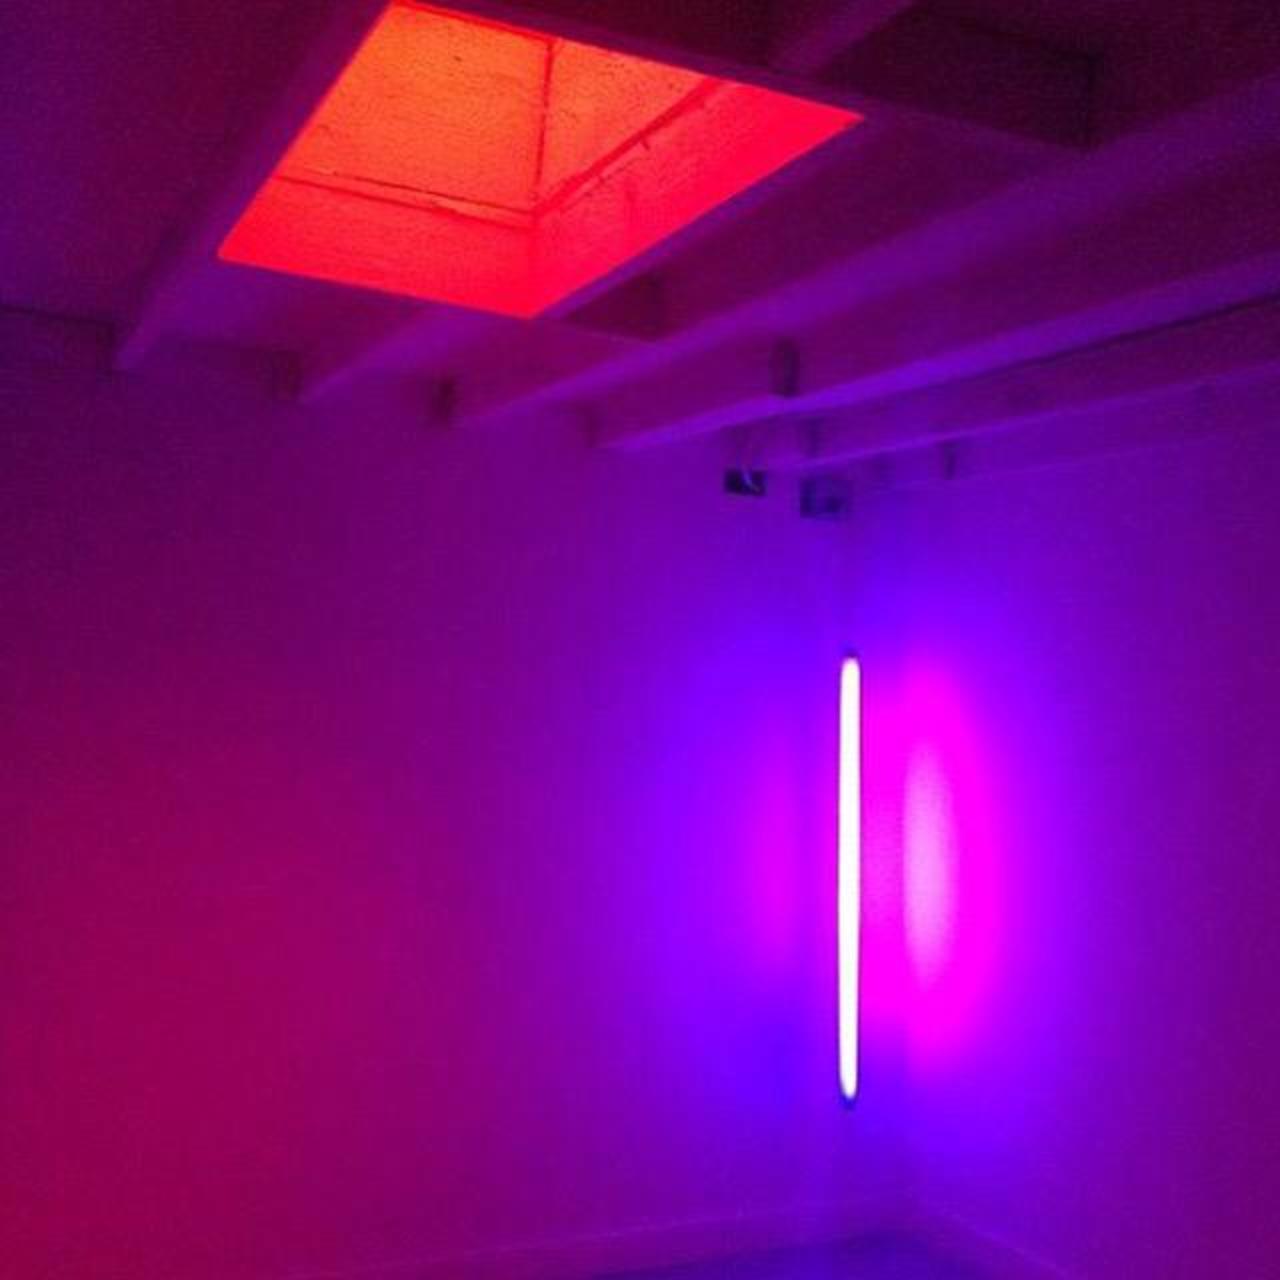 Cannot wait until Saturday's opening at @Interstitial_T ⚡️ opening reception is 9/12 at 6pm #interstitial #lightart http://t.co/Z1Bryl9ACg